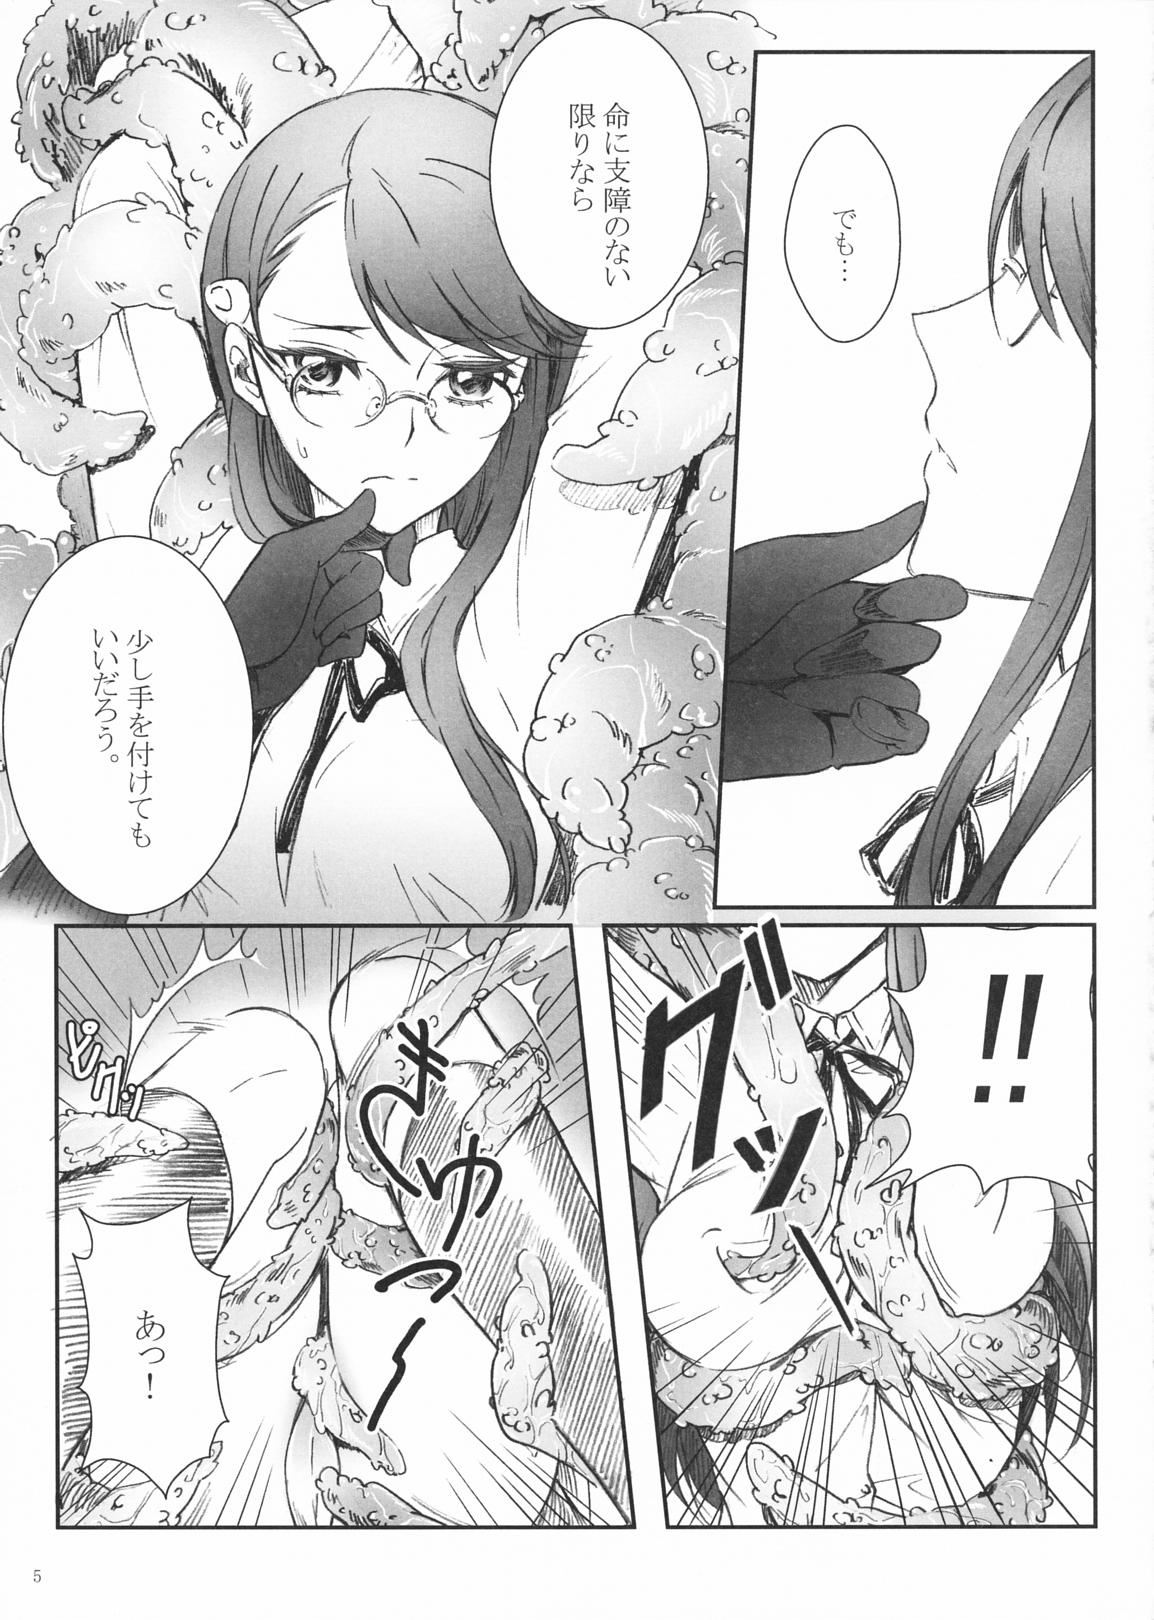 Hottie Eclipse of the MooN - Heartcatch precure Curious - Page 7